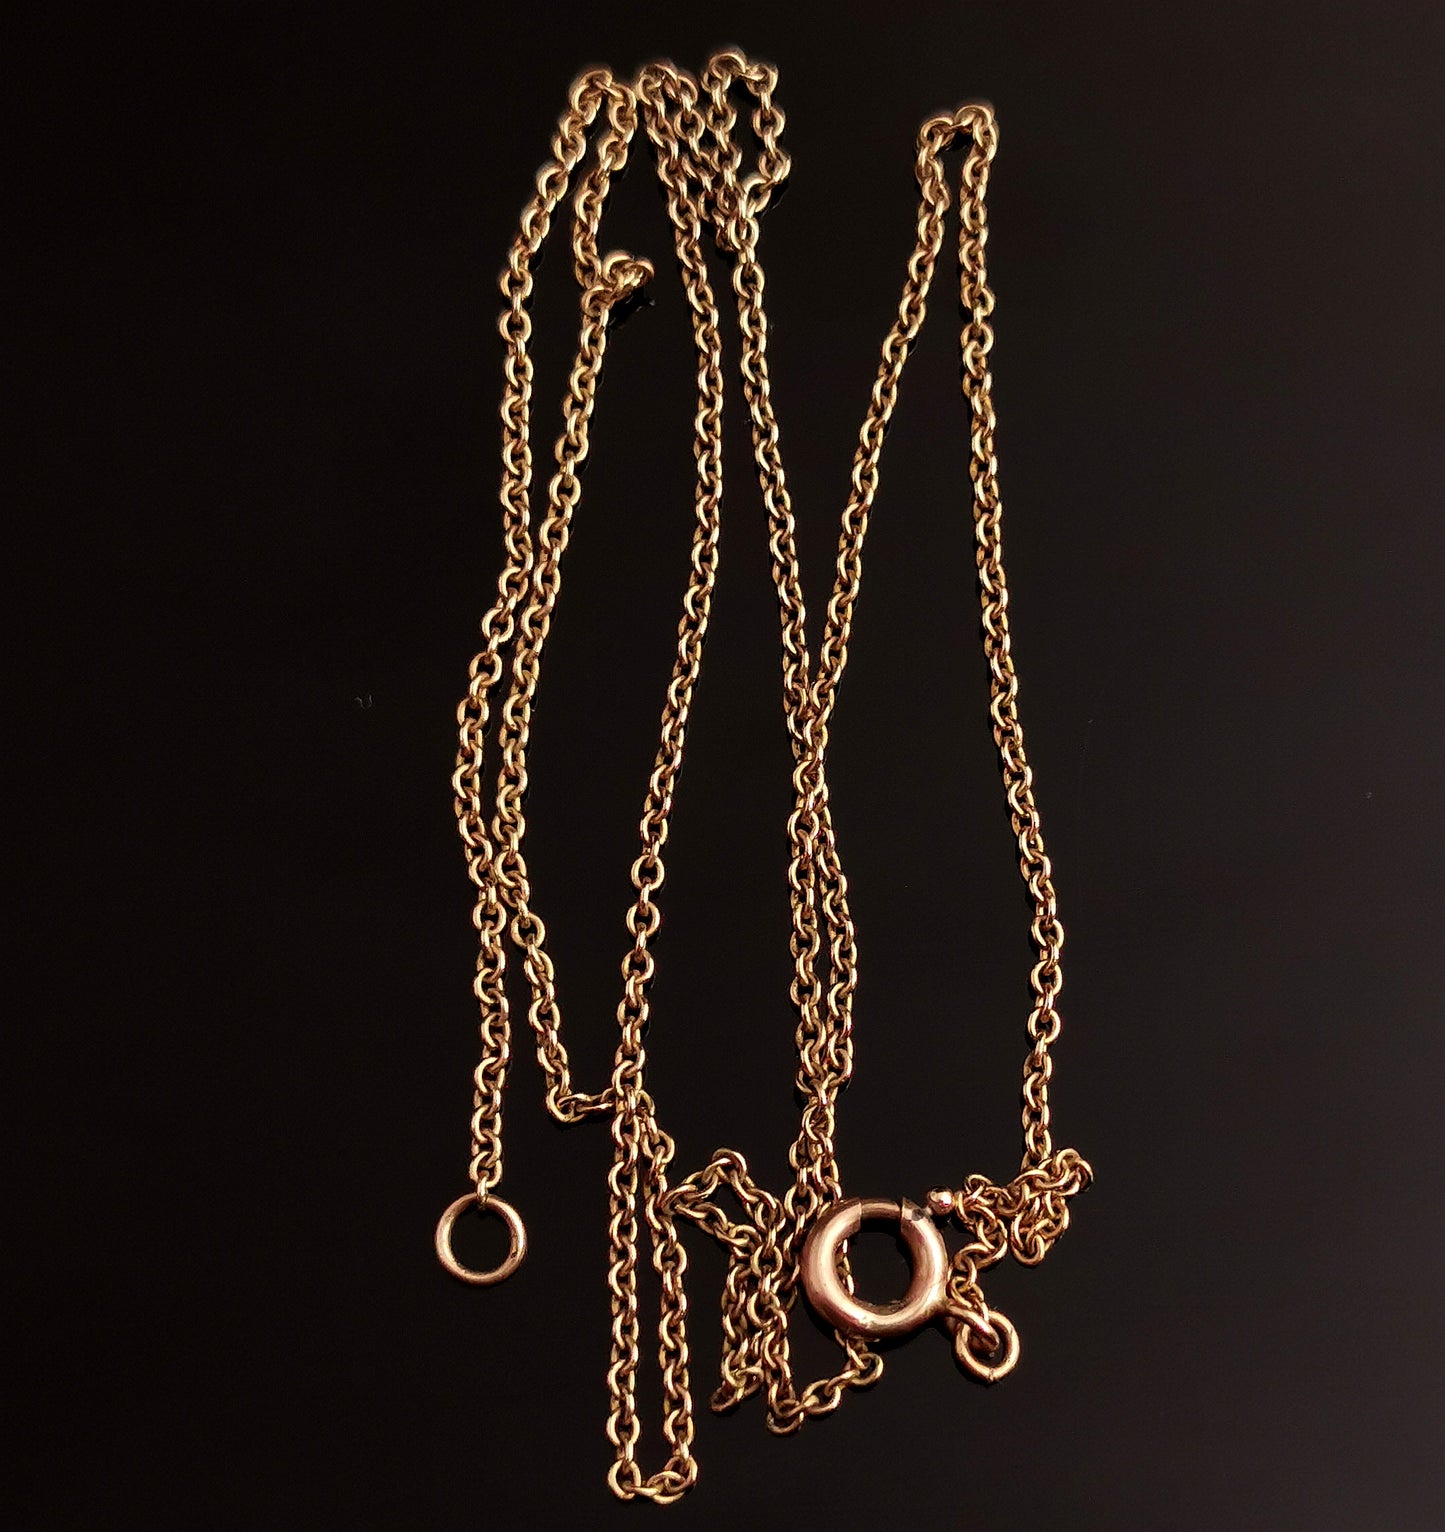 Vintage 9ct gold trace link chain necklace